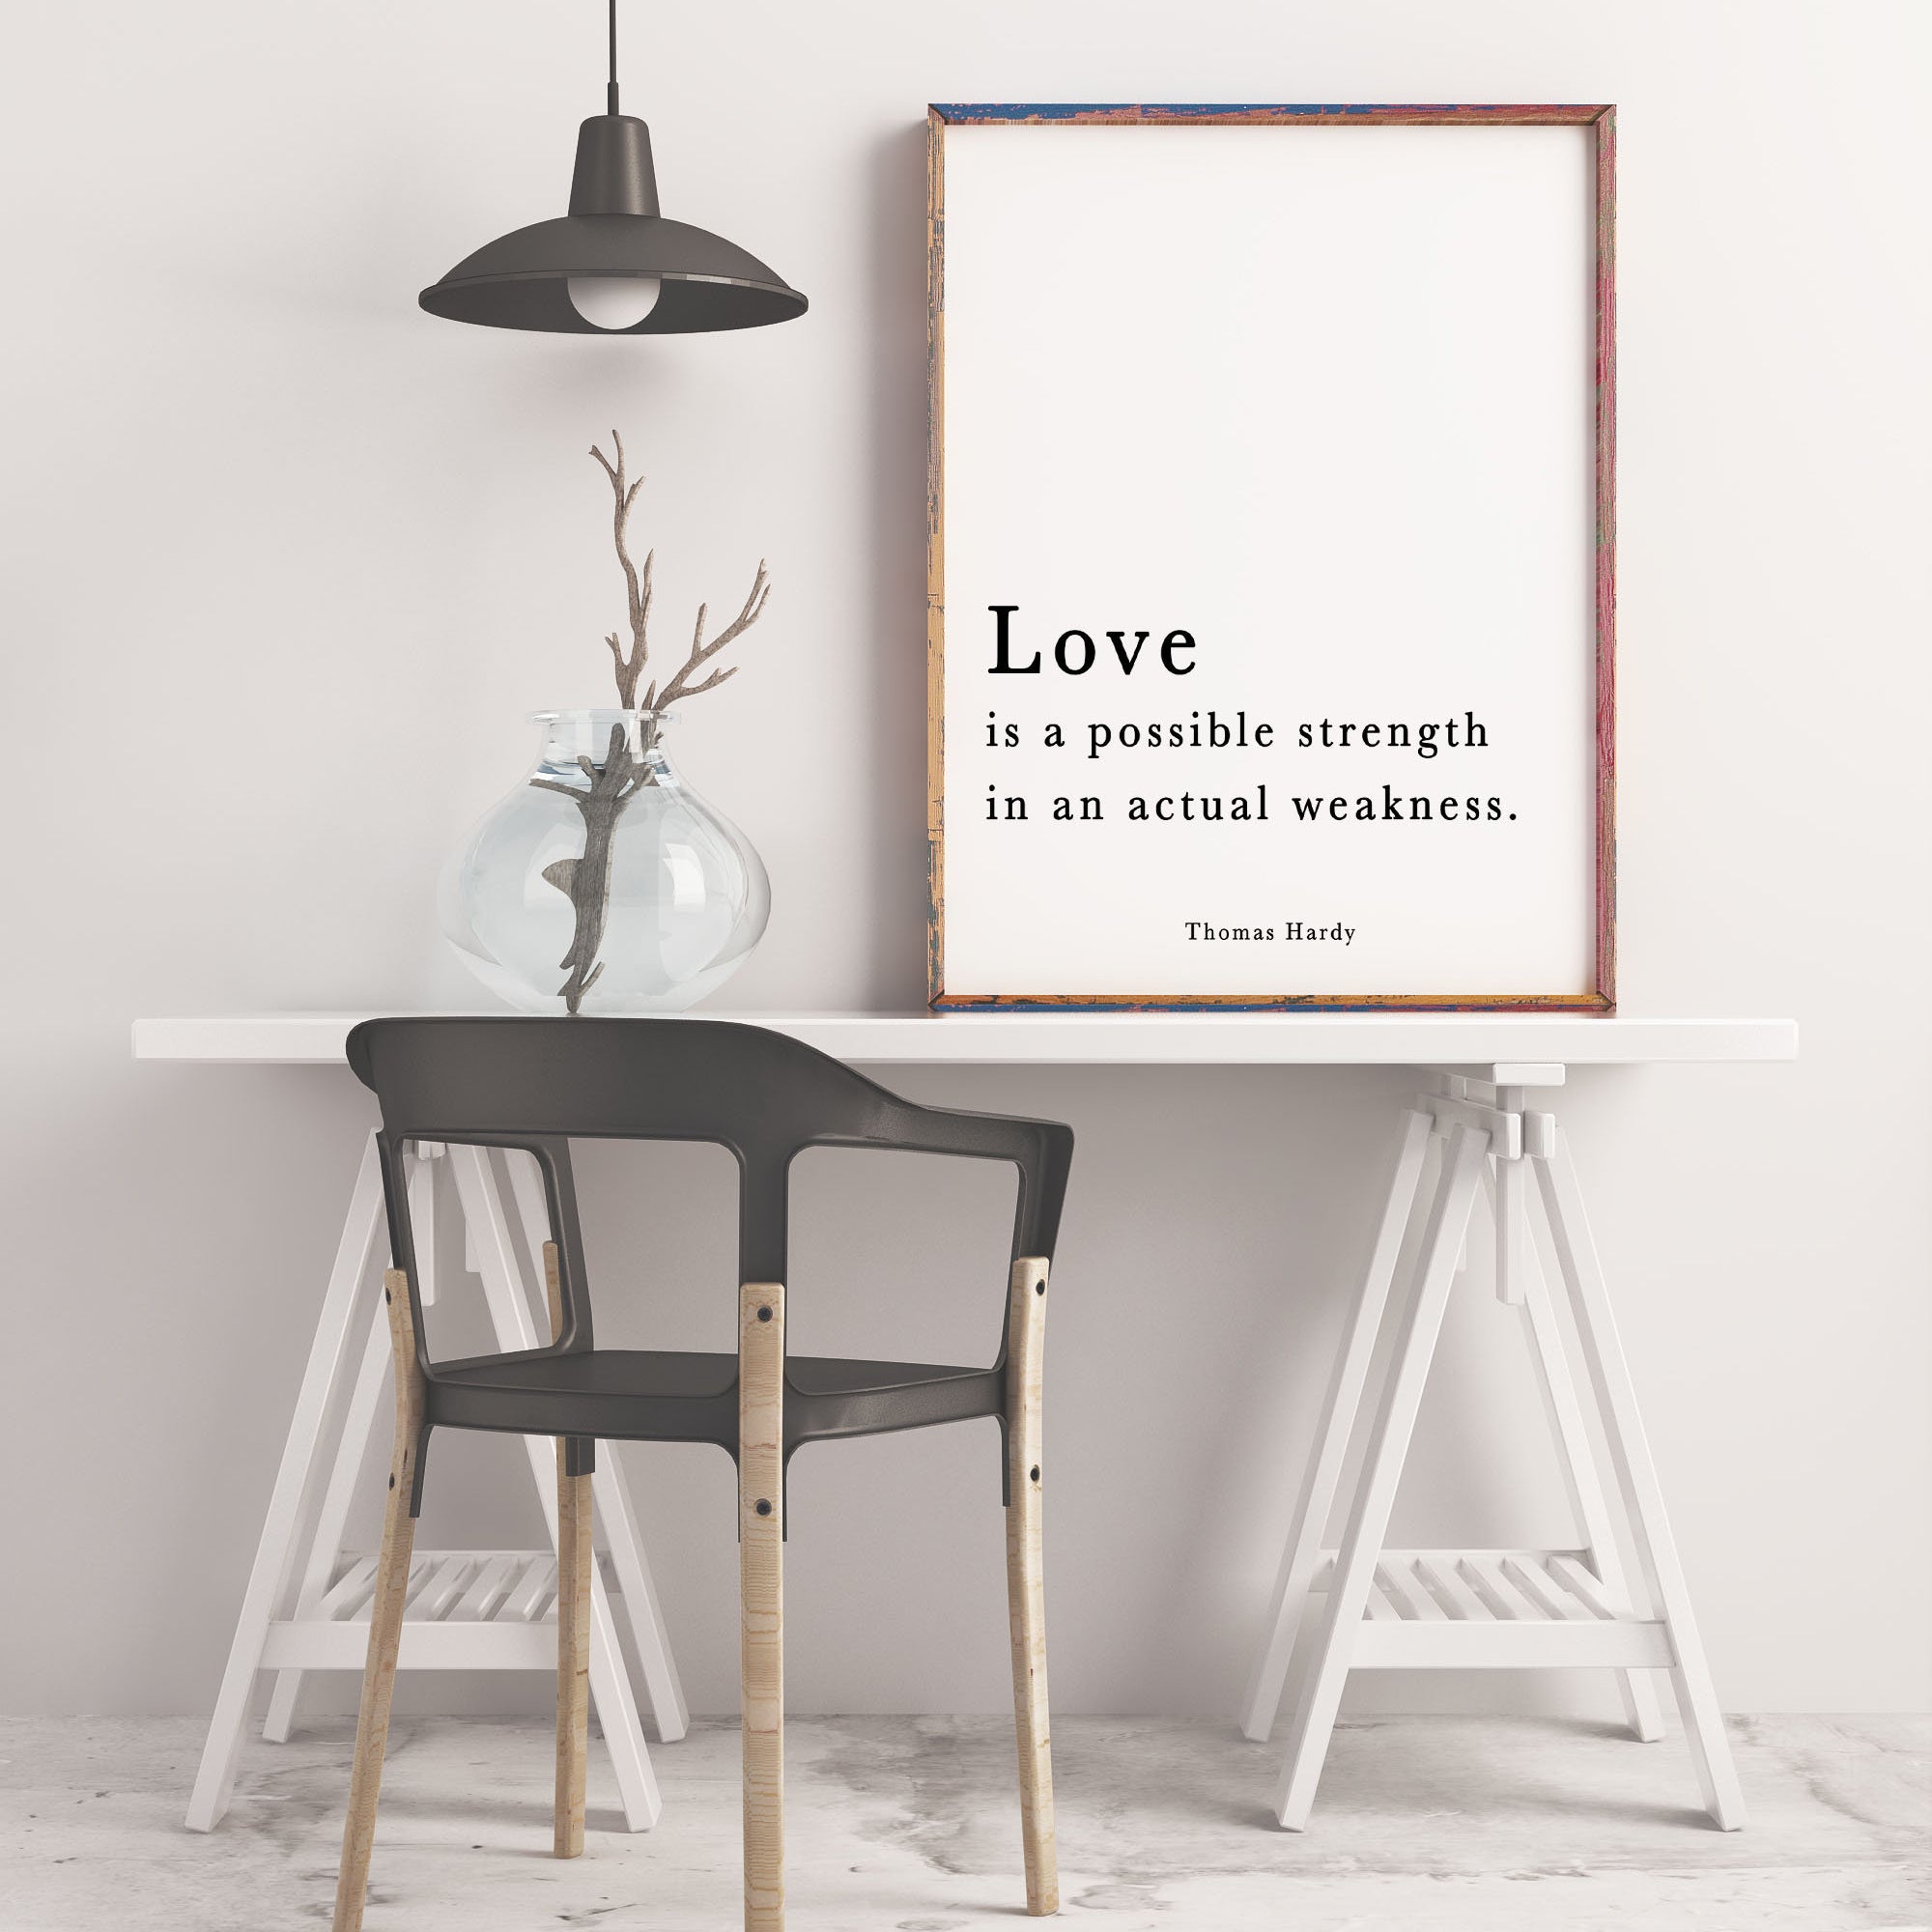 Thomas Hardy Quote Print, Love is a possible strength in an actual weakness, Modern Minimalist Art, Inspirational, Black & White, Unframed - BookQuoteDecor